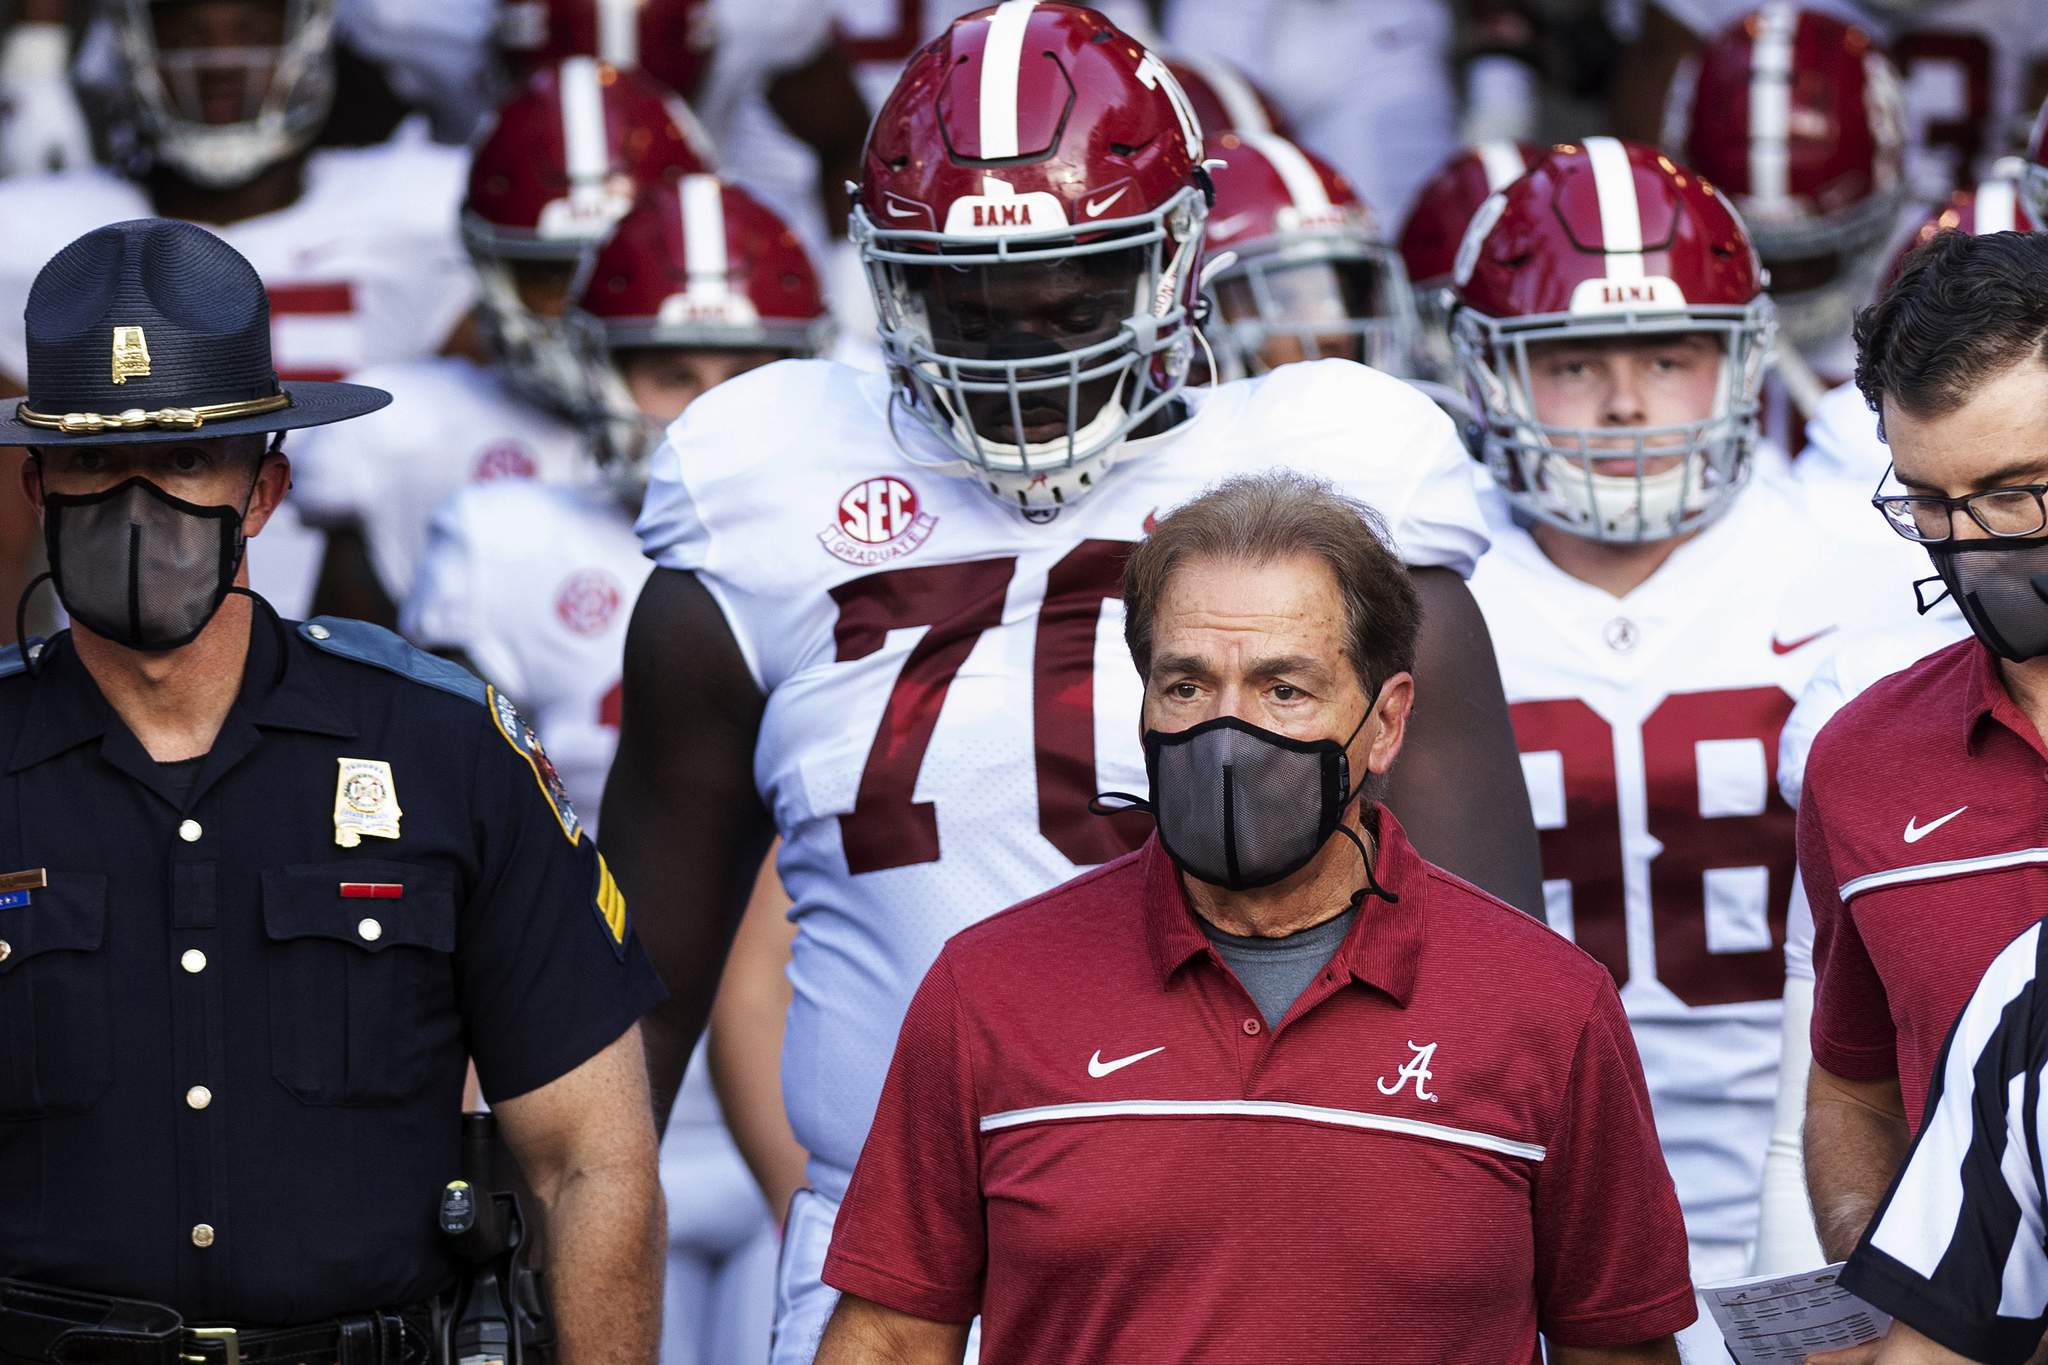 Playmakers wanted: Defending champ Alabama replacing stars